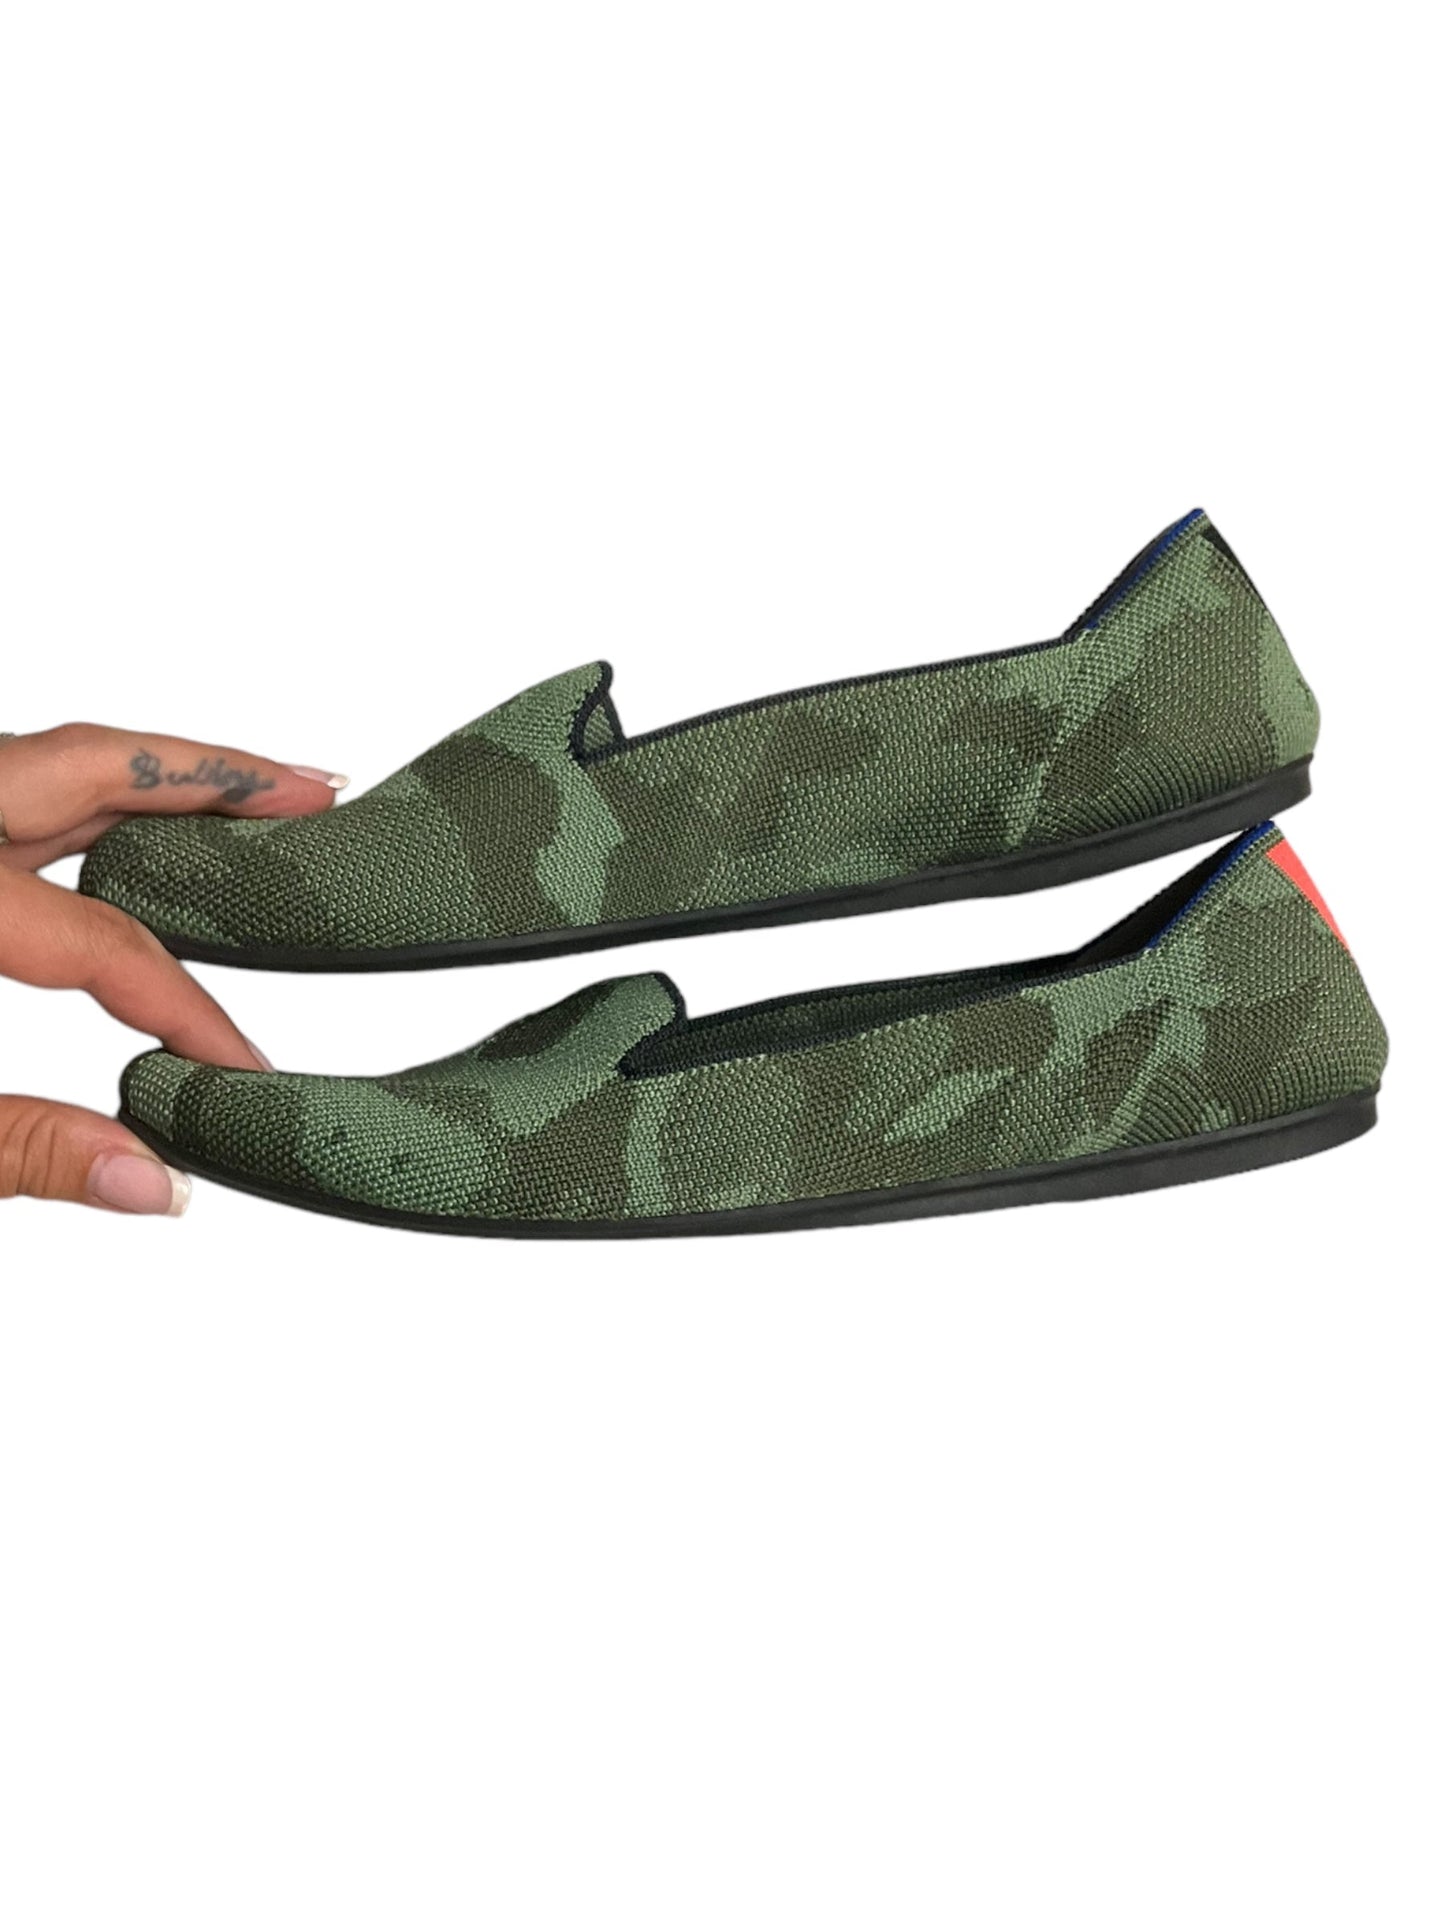 Camouflage Print Shoes Flats Rothys, Size 9.5